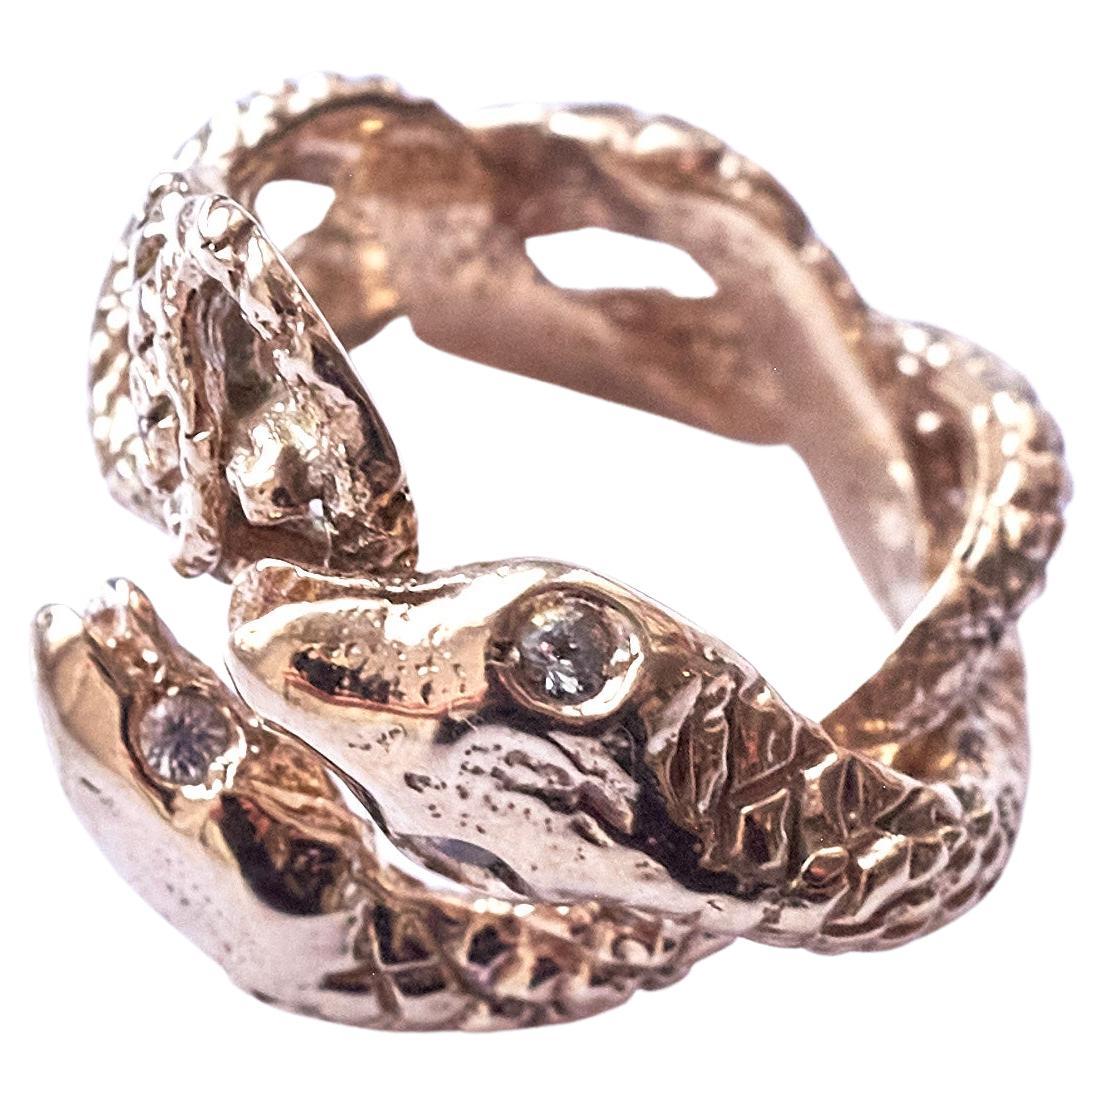 Animal jewelry Aquamarine Snake Ring Bronze Cocktail Ring J Dauphin For Sale